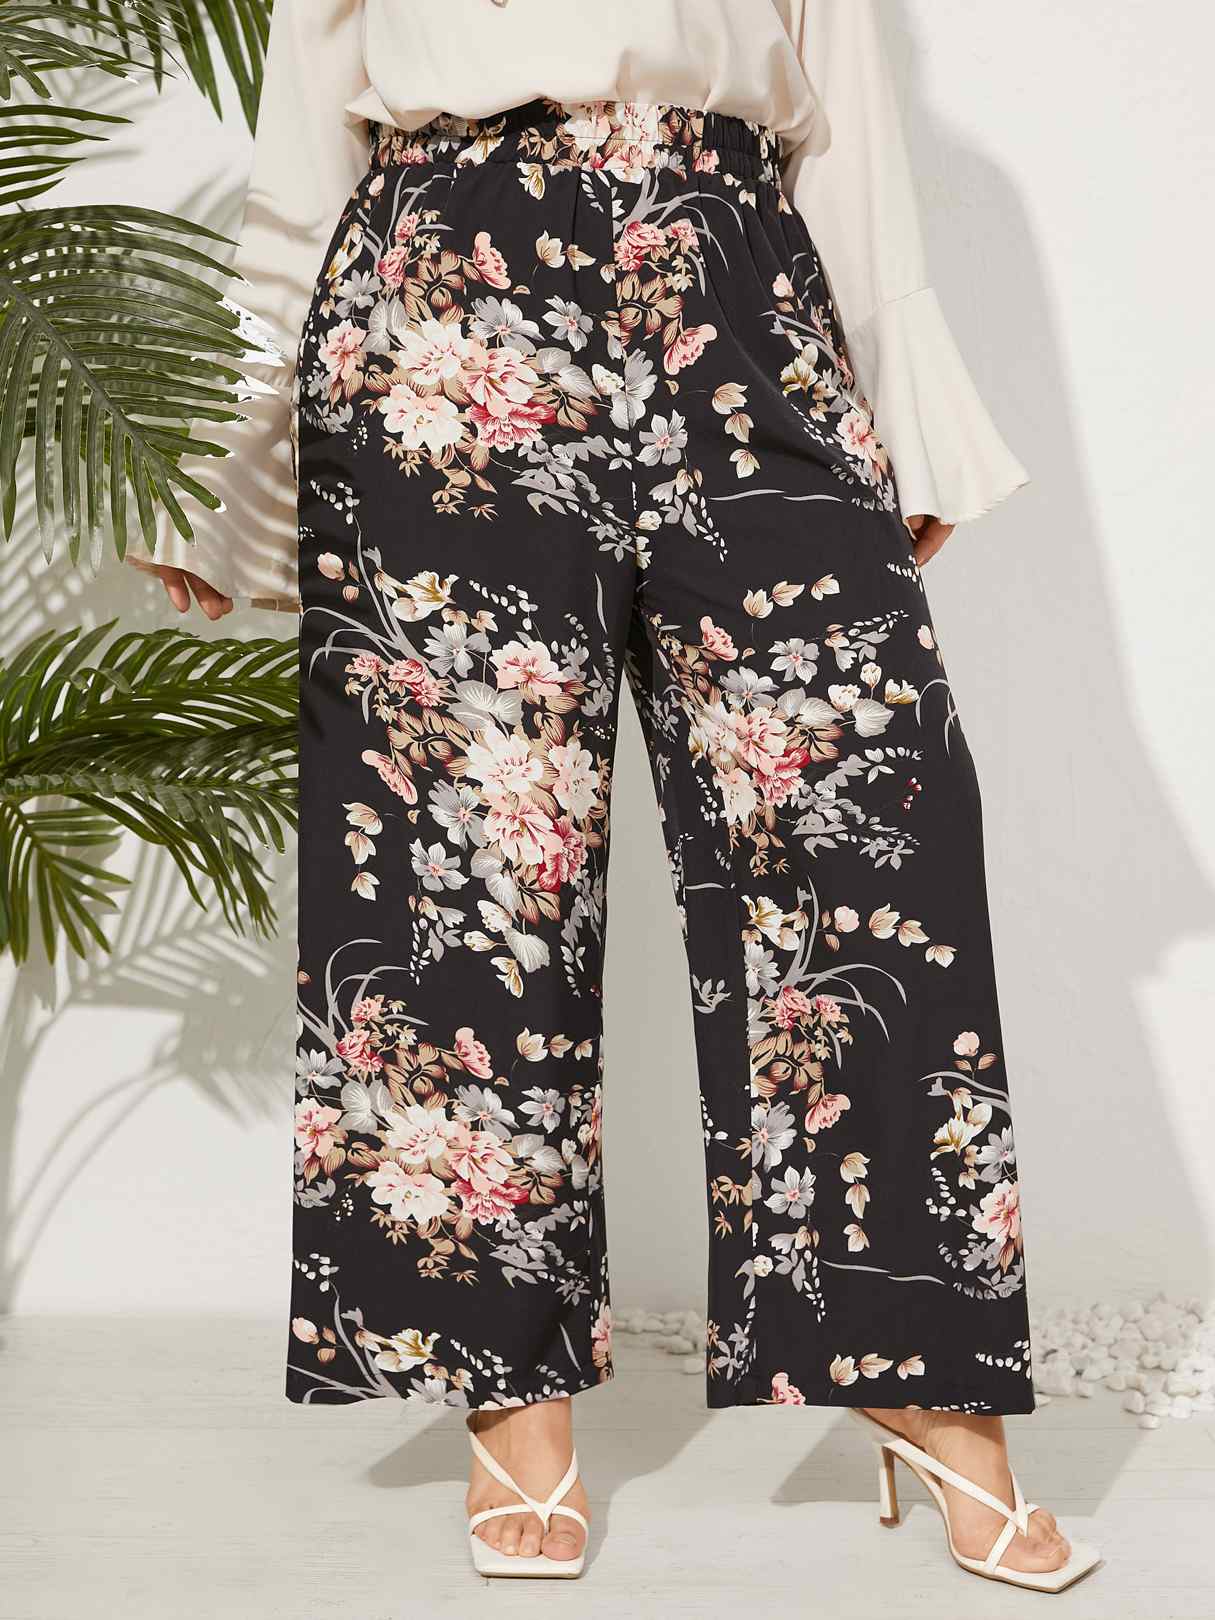 Aovica Plus Size Long Pants Women Summer High Waist Bohemian Flower Printed Wide Leg Pants 2022 Casual Vintage Holiday Trousers